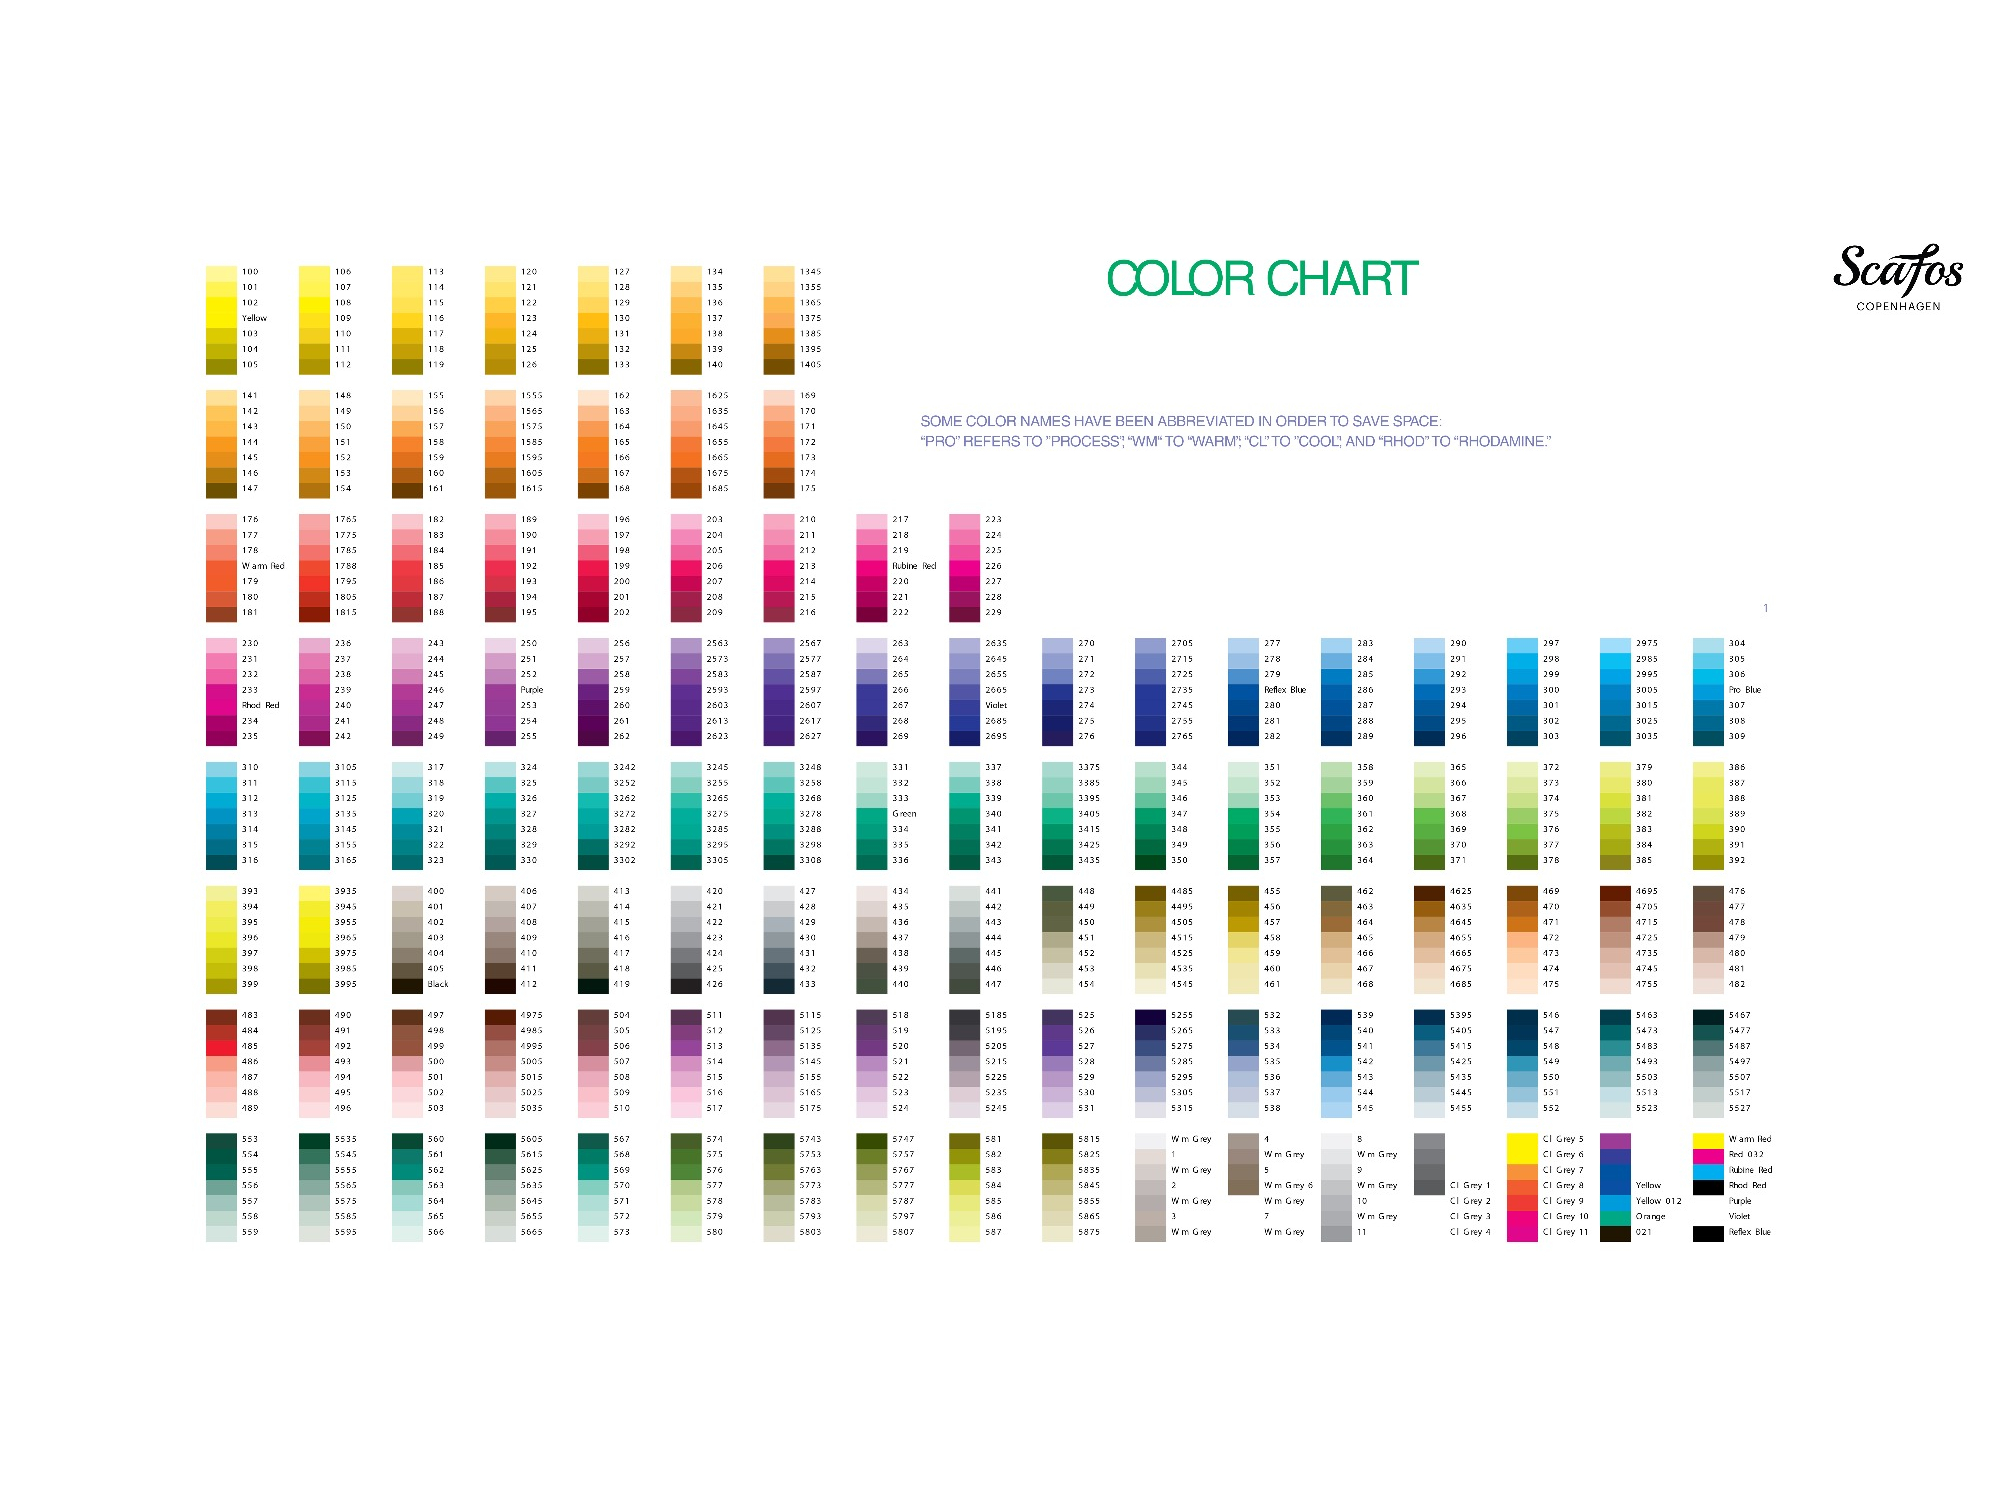 Color Chart On Fabric